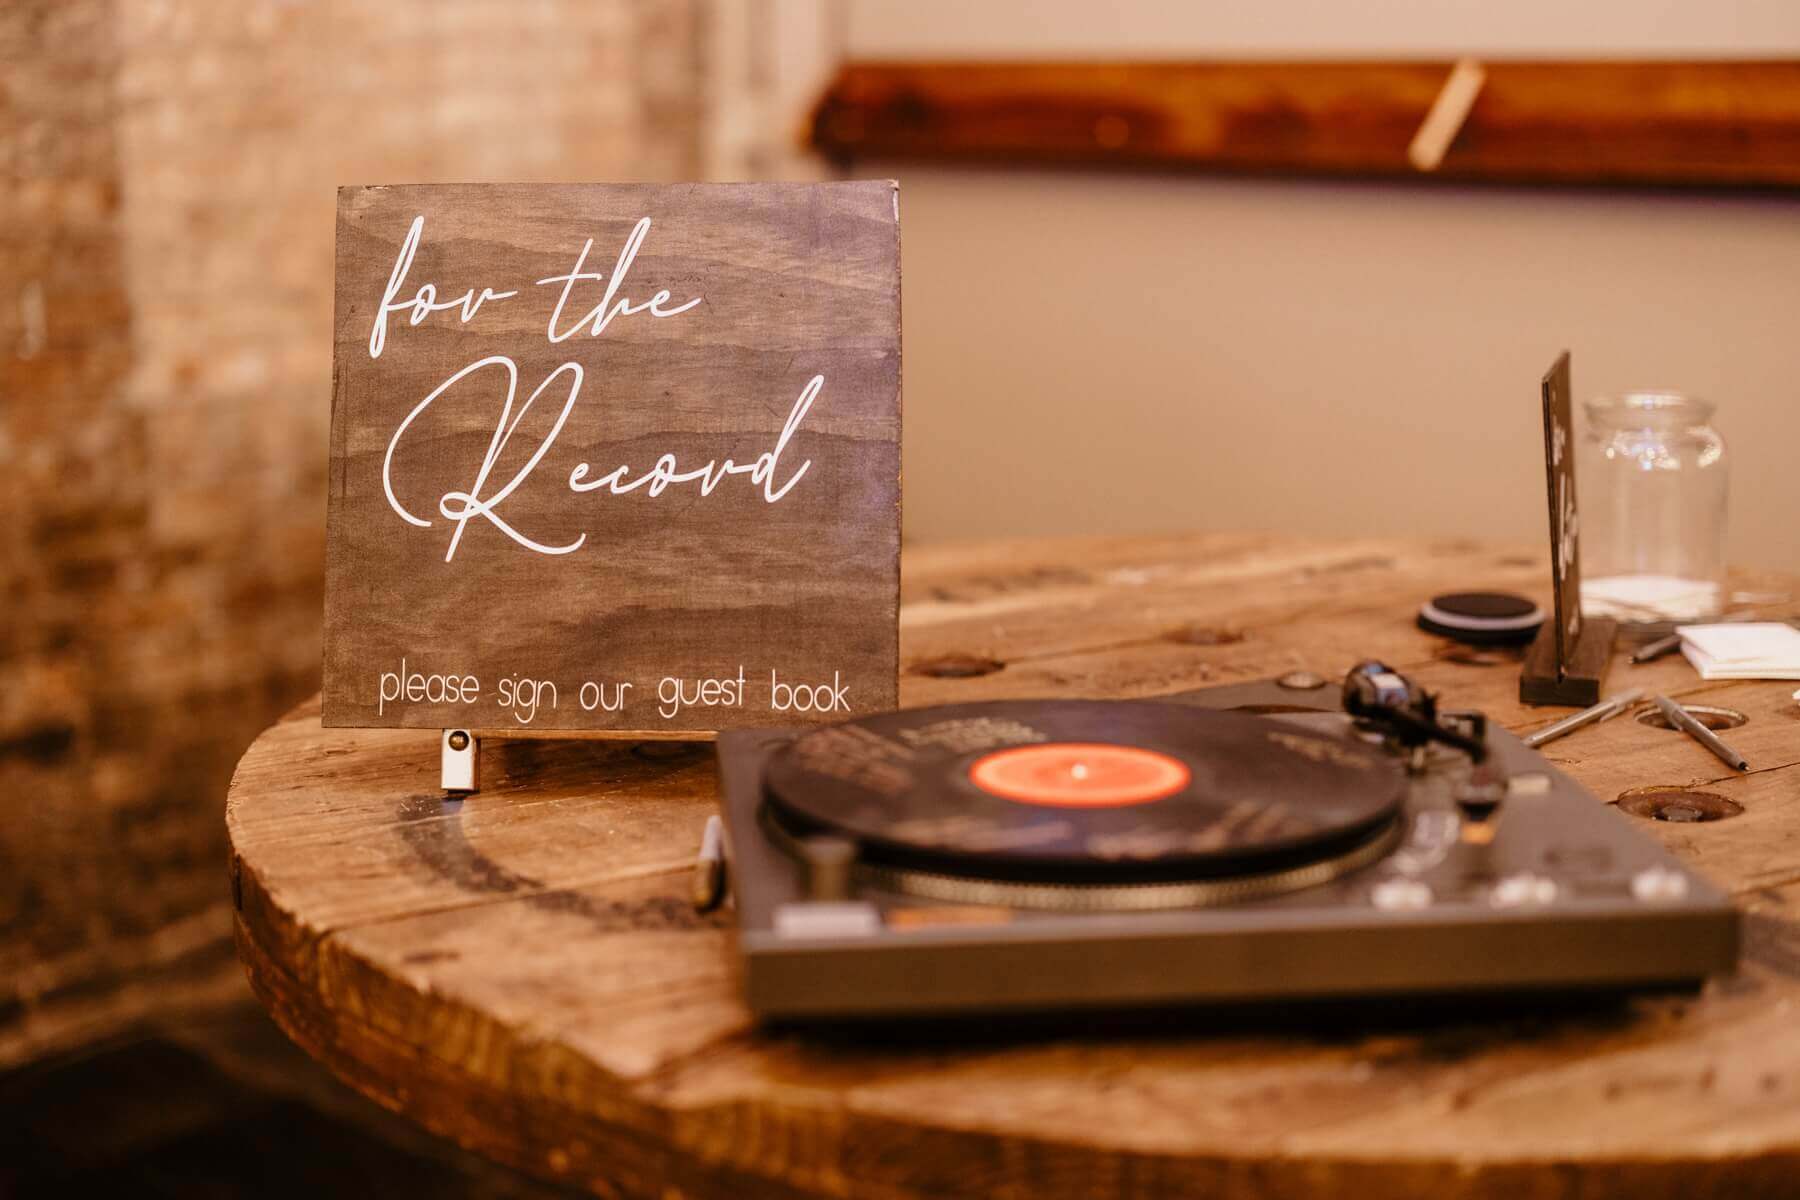 Record player guest book at wedding reception